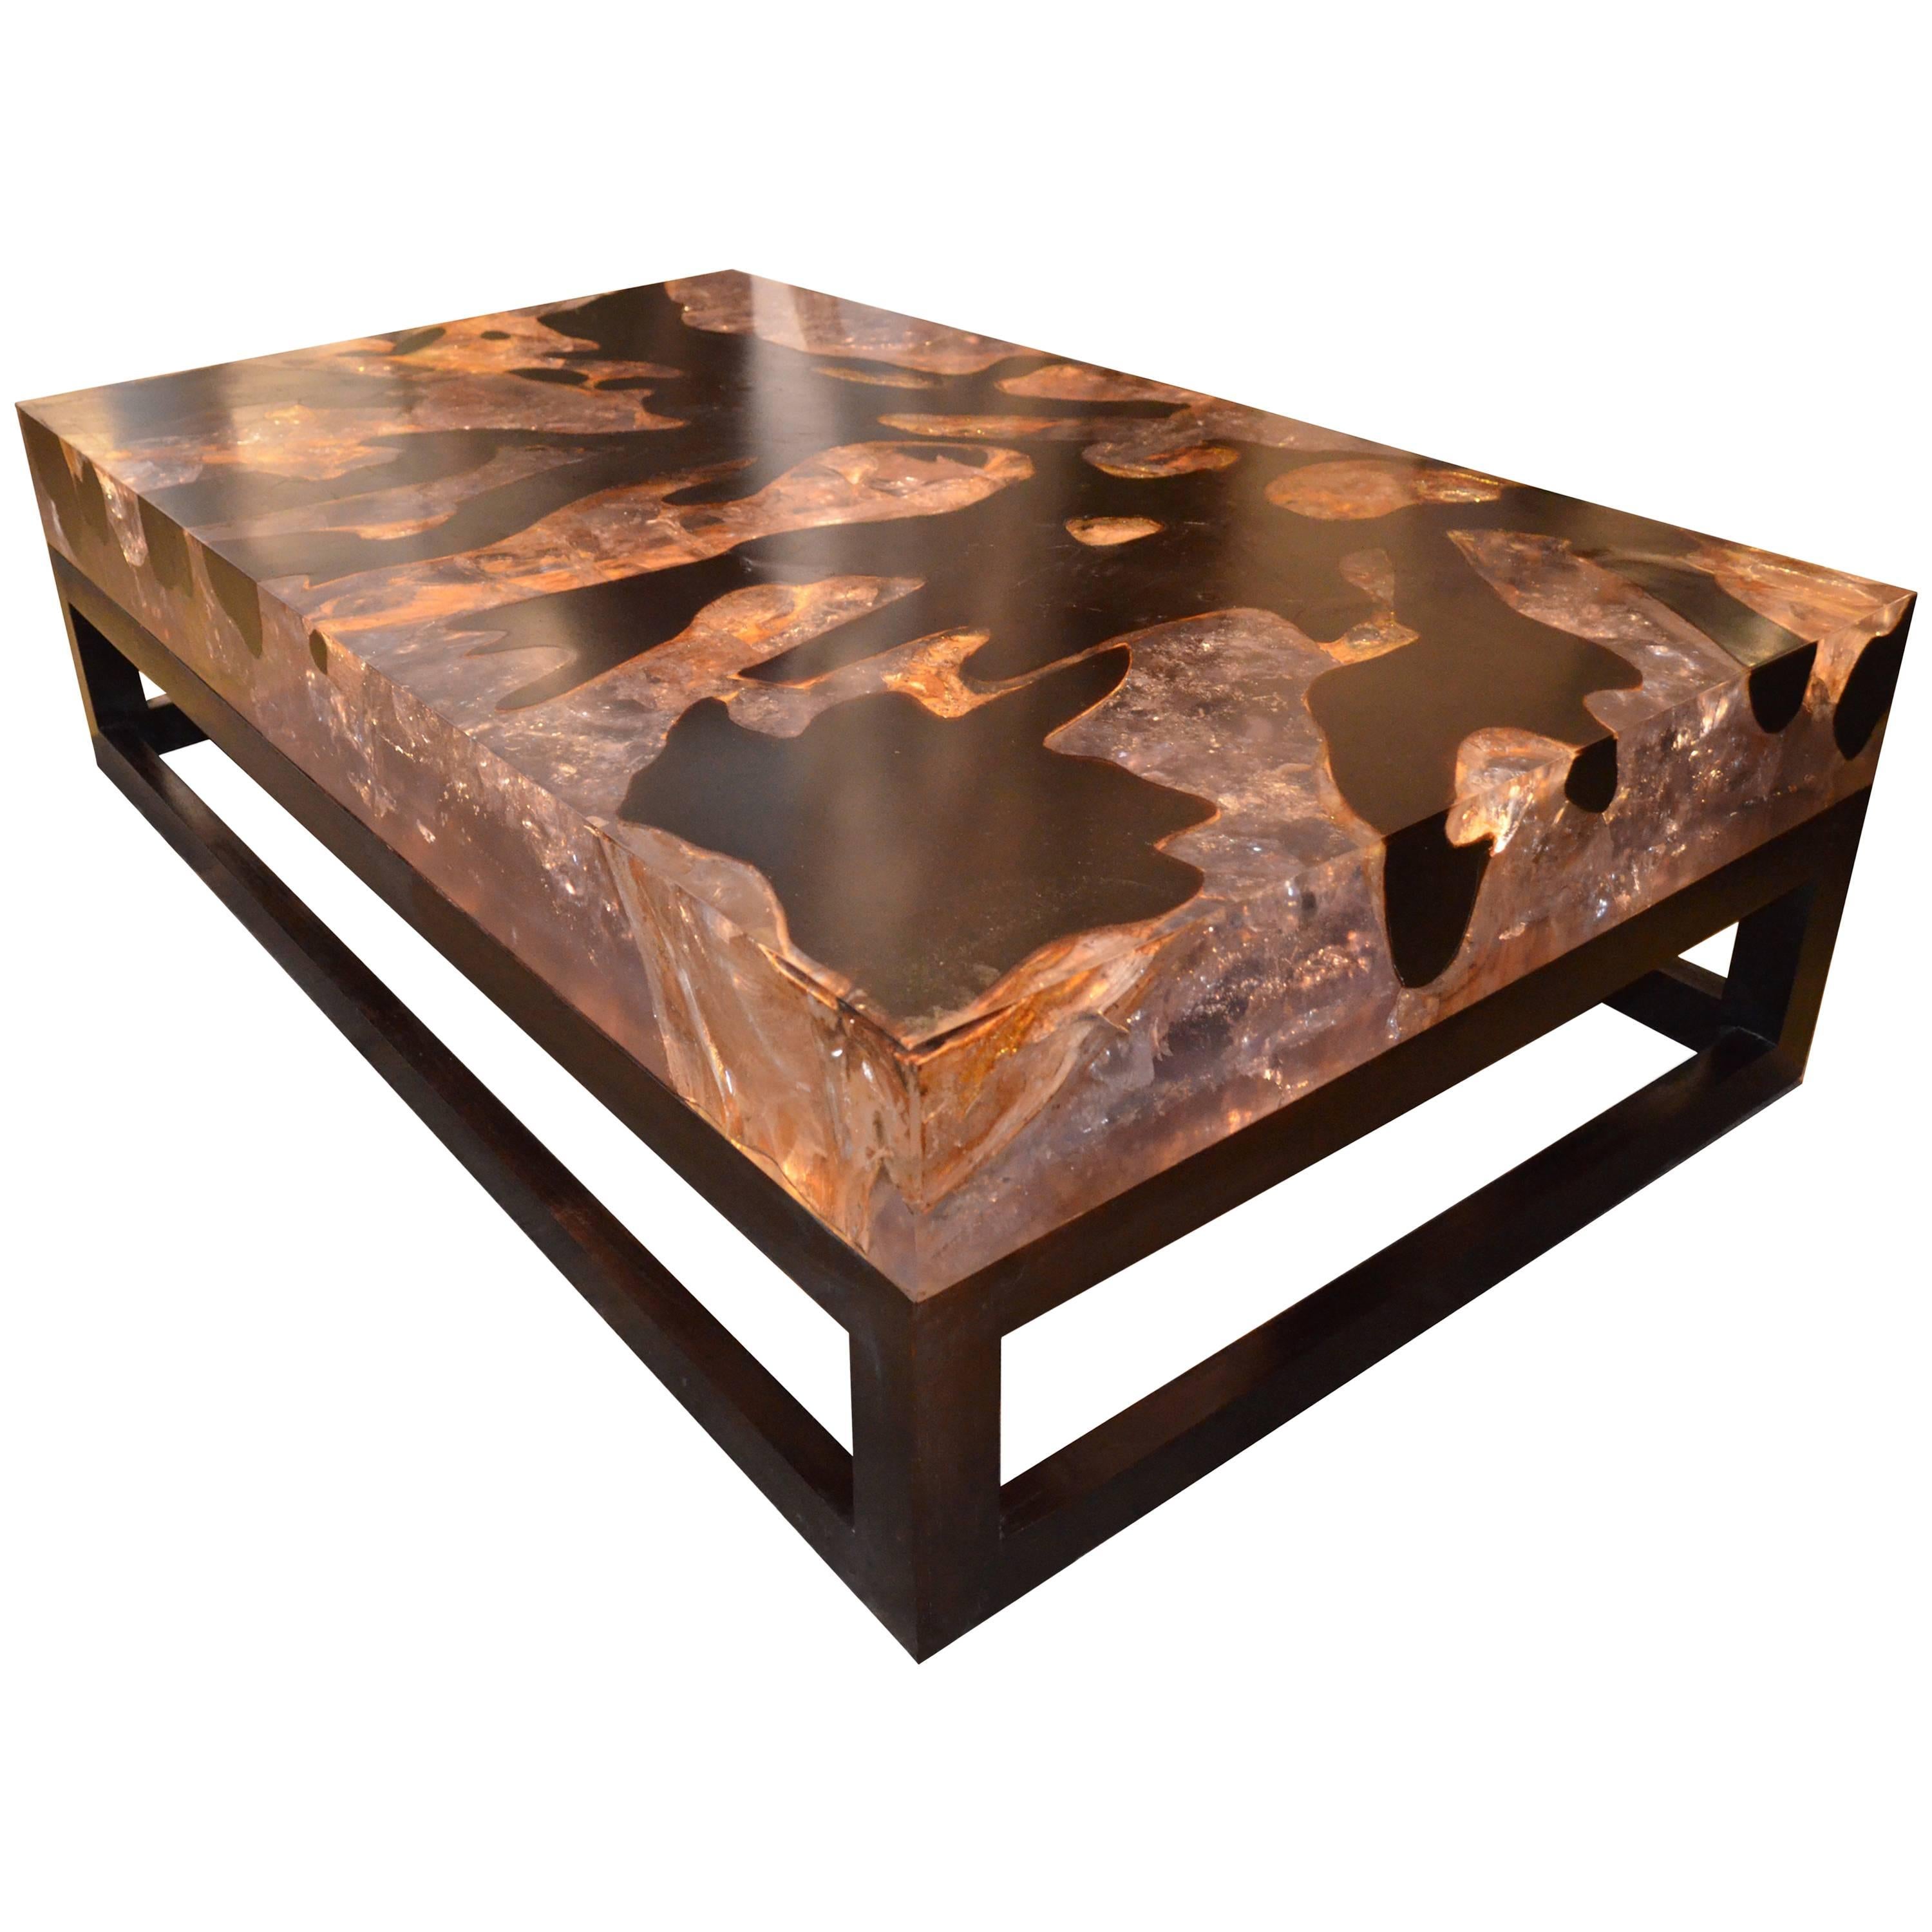 builder Wither Home country Andrianna Shamaris Cracked Resin Coffee Table with Base For Sale at 1stDibs